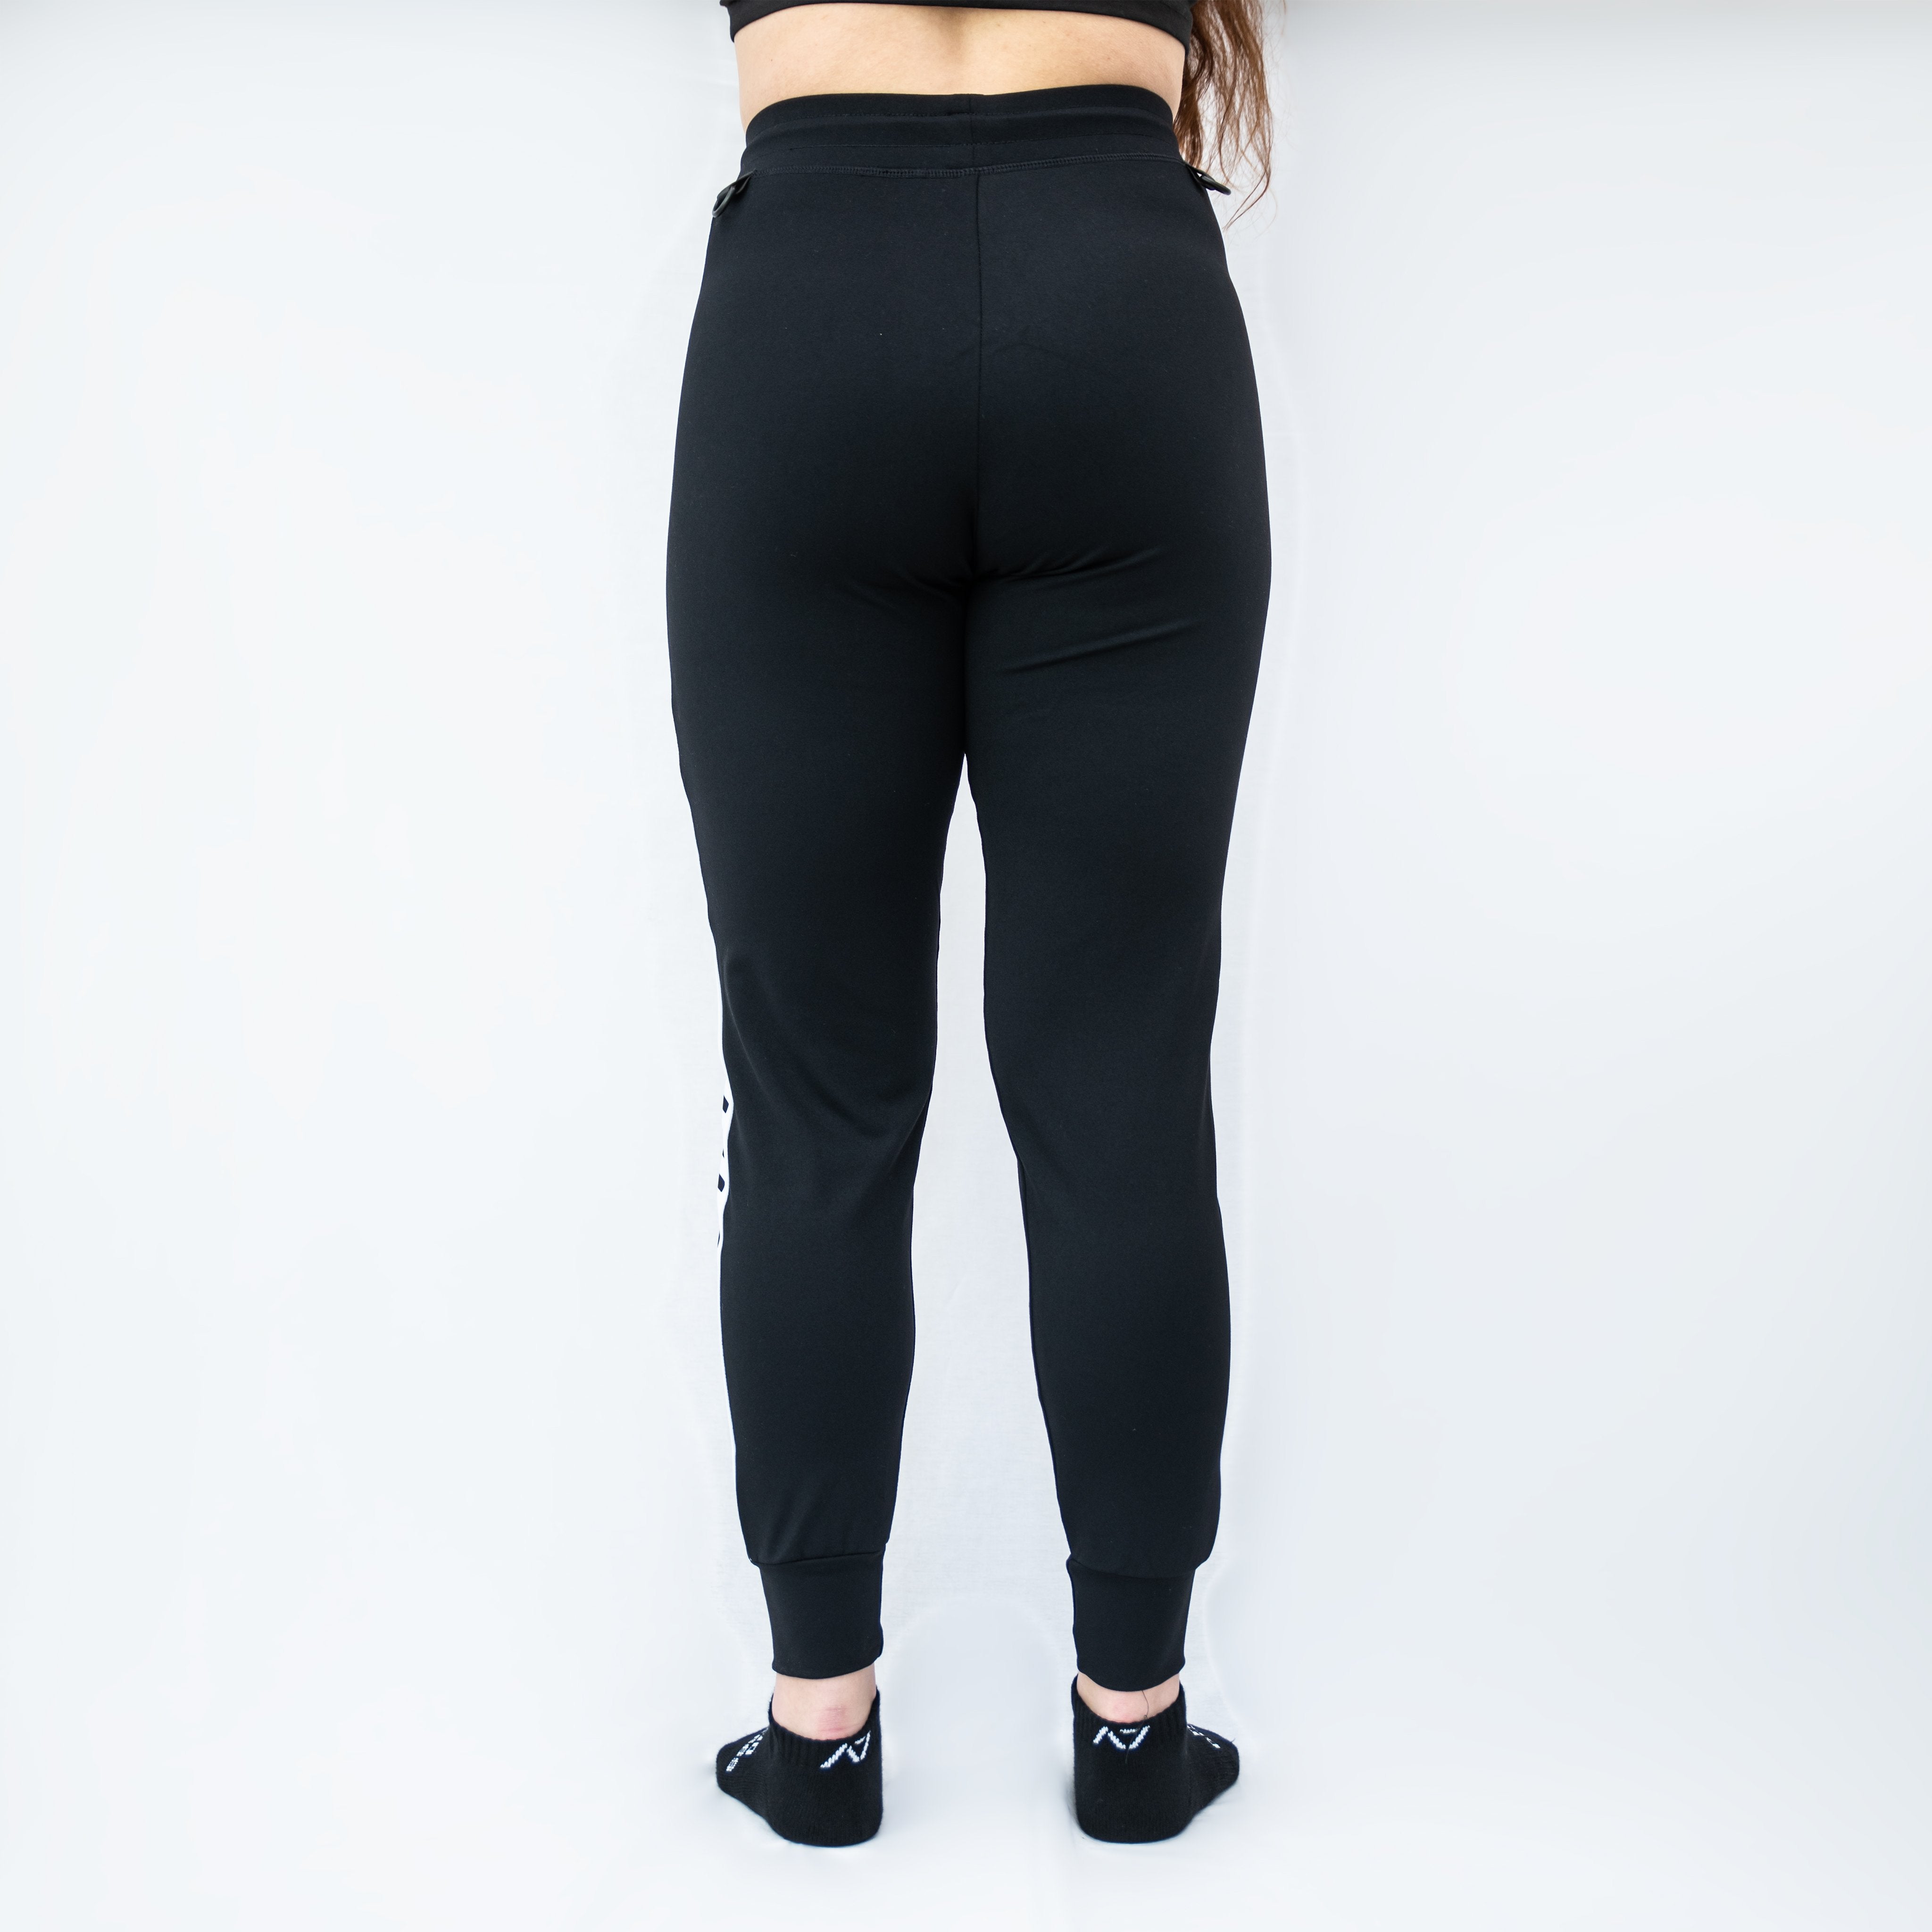 Defy joggers are just as comfortable in the gym as they are going out. These are made with premium moisture-wicking 4-way-stretch material for greater range of motion.  These are a great fit for both men and women.